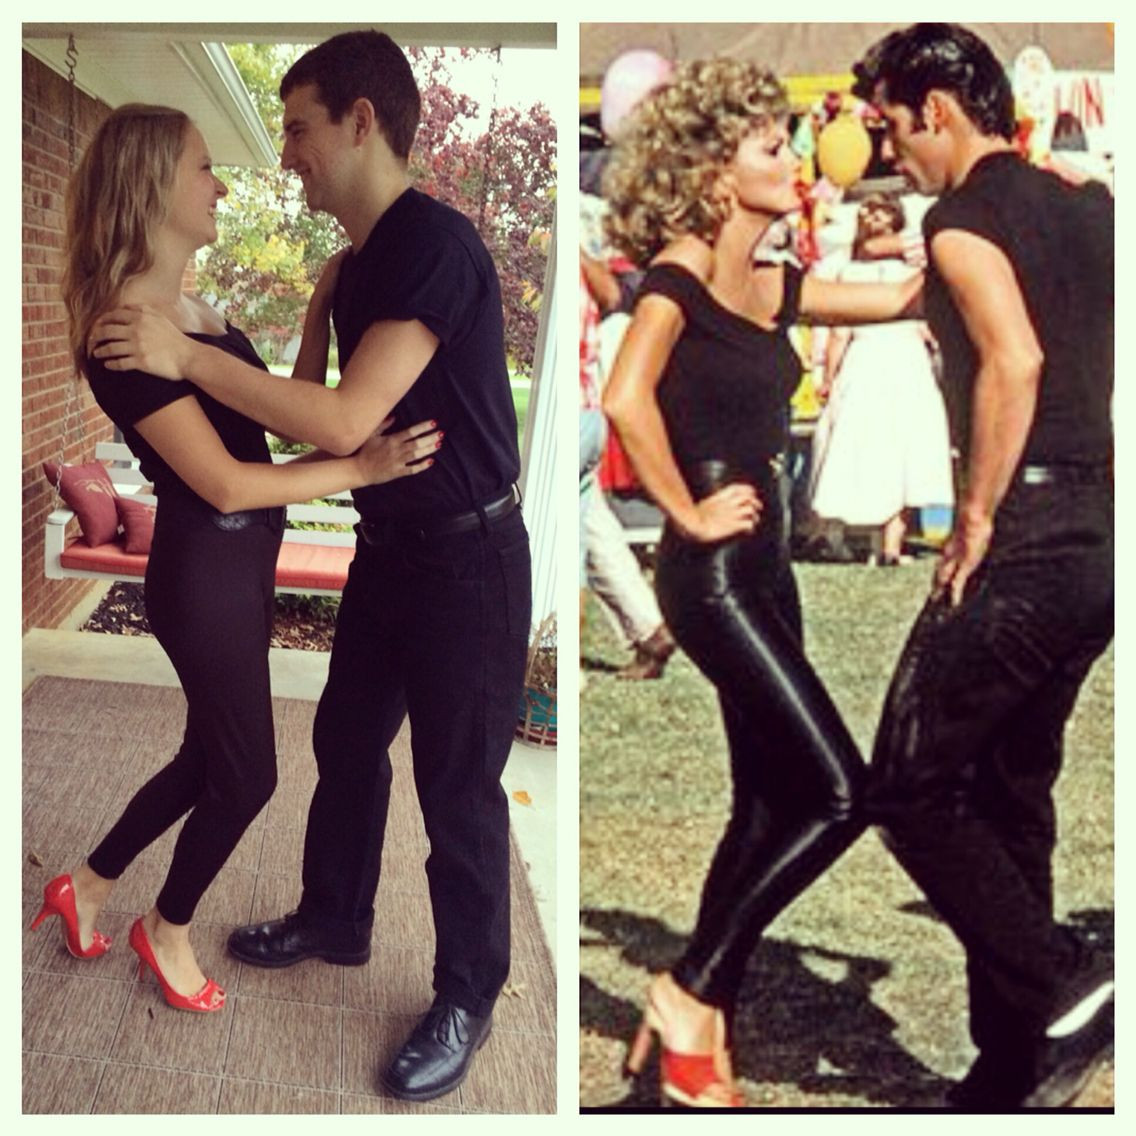 Grease Costume DIY
 Couples Halloween costume Danny and Sandy from Grease